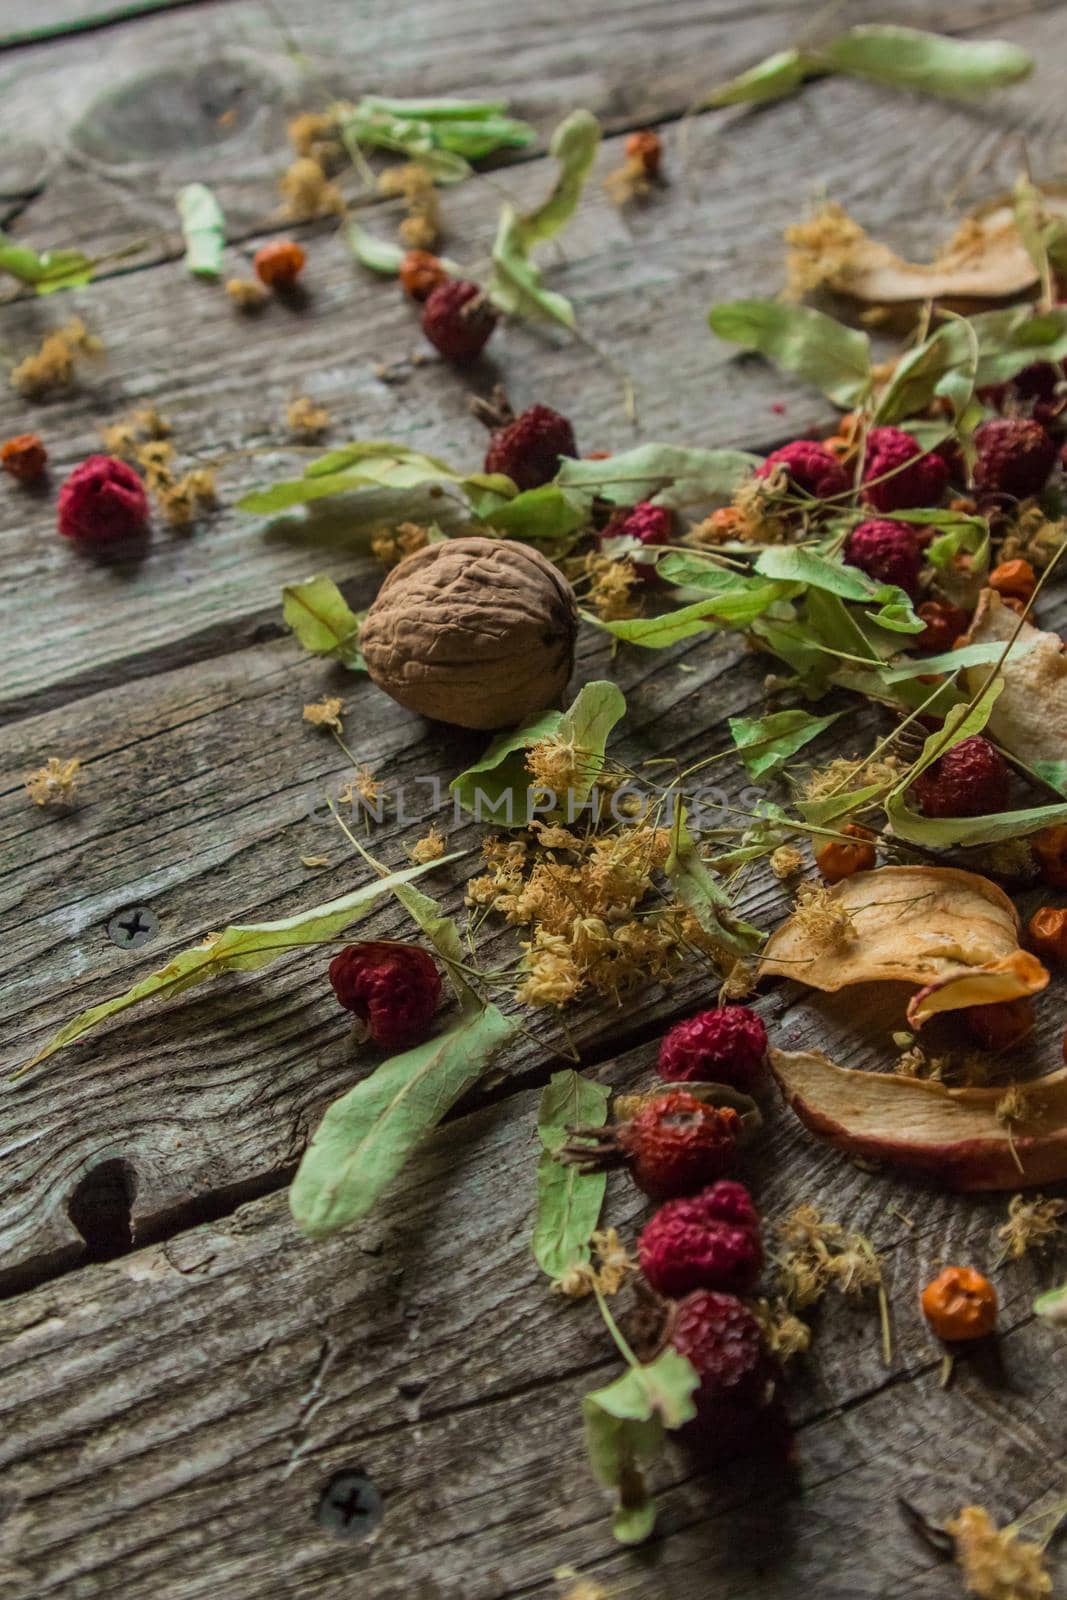 Dried delicious delicacies. Dry pieces of linden, rose hips, pears, raspberries, apples and walnuts snack on a wooden background by AYDO8